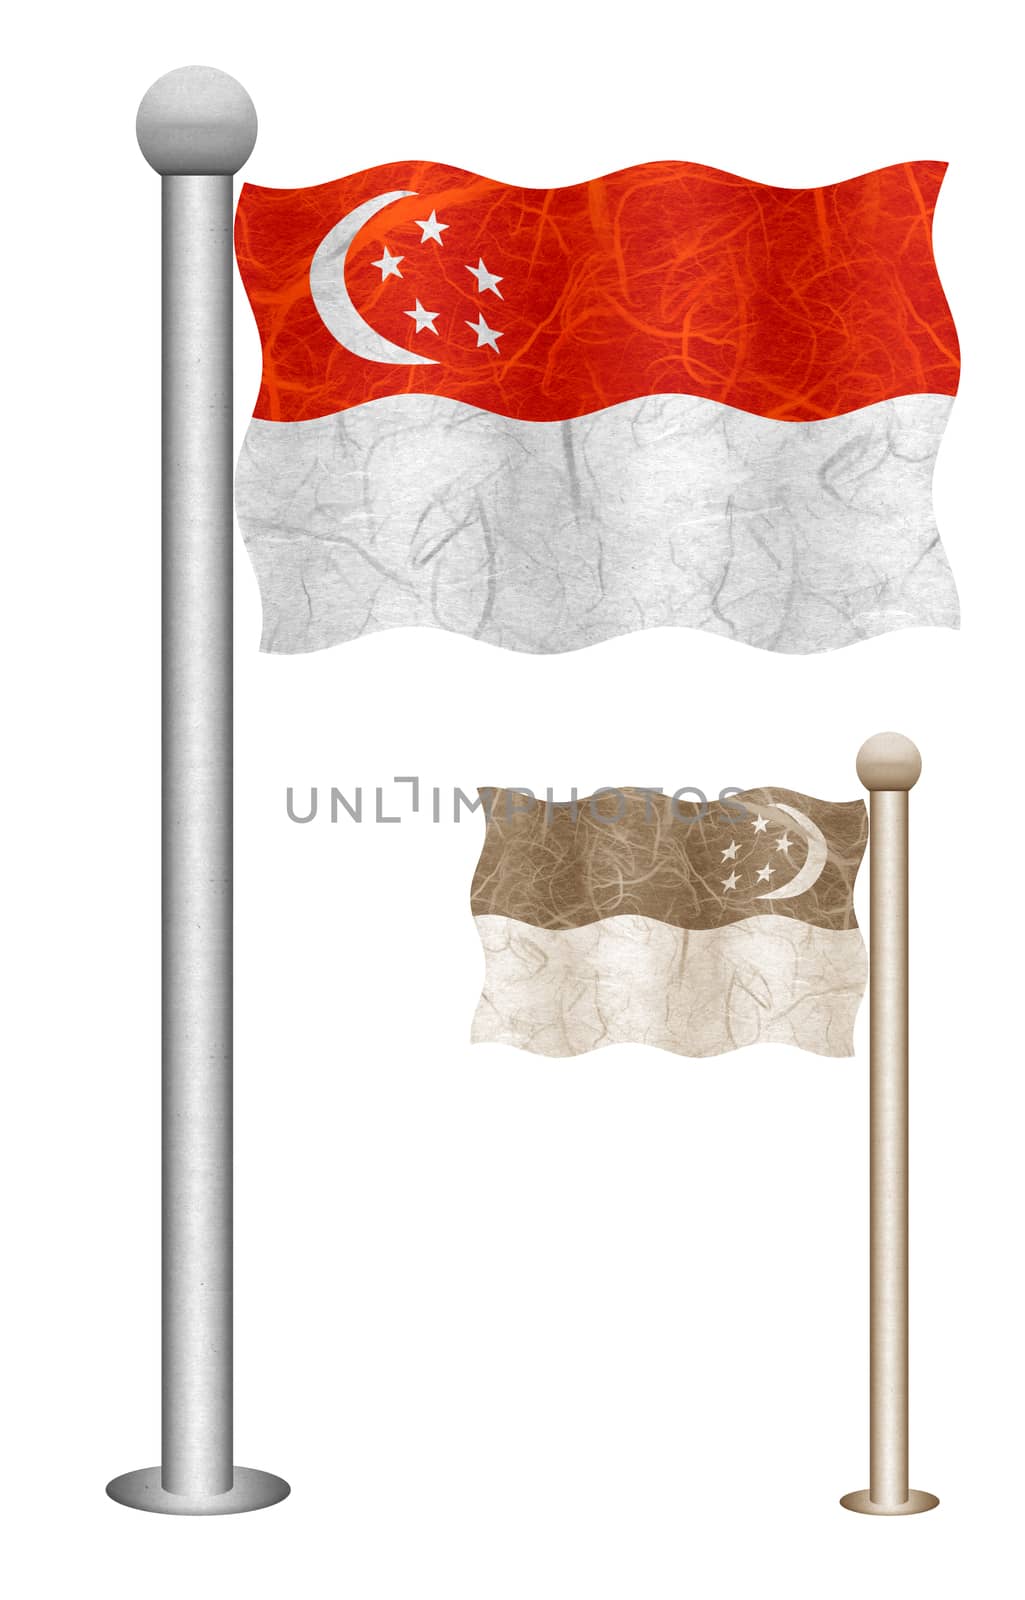 Singapore flag waving on the wind. Flags of countries in Asia. Mulberry paper on white background.